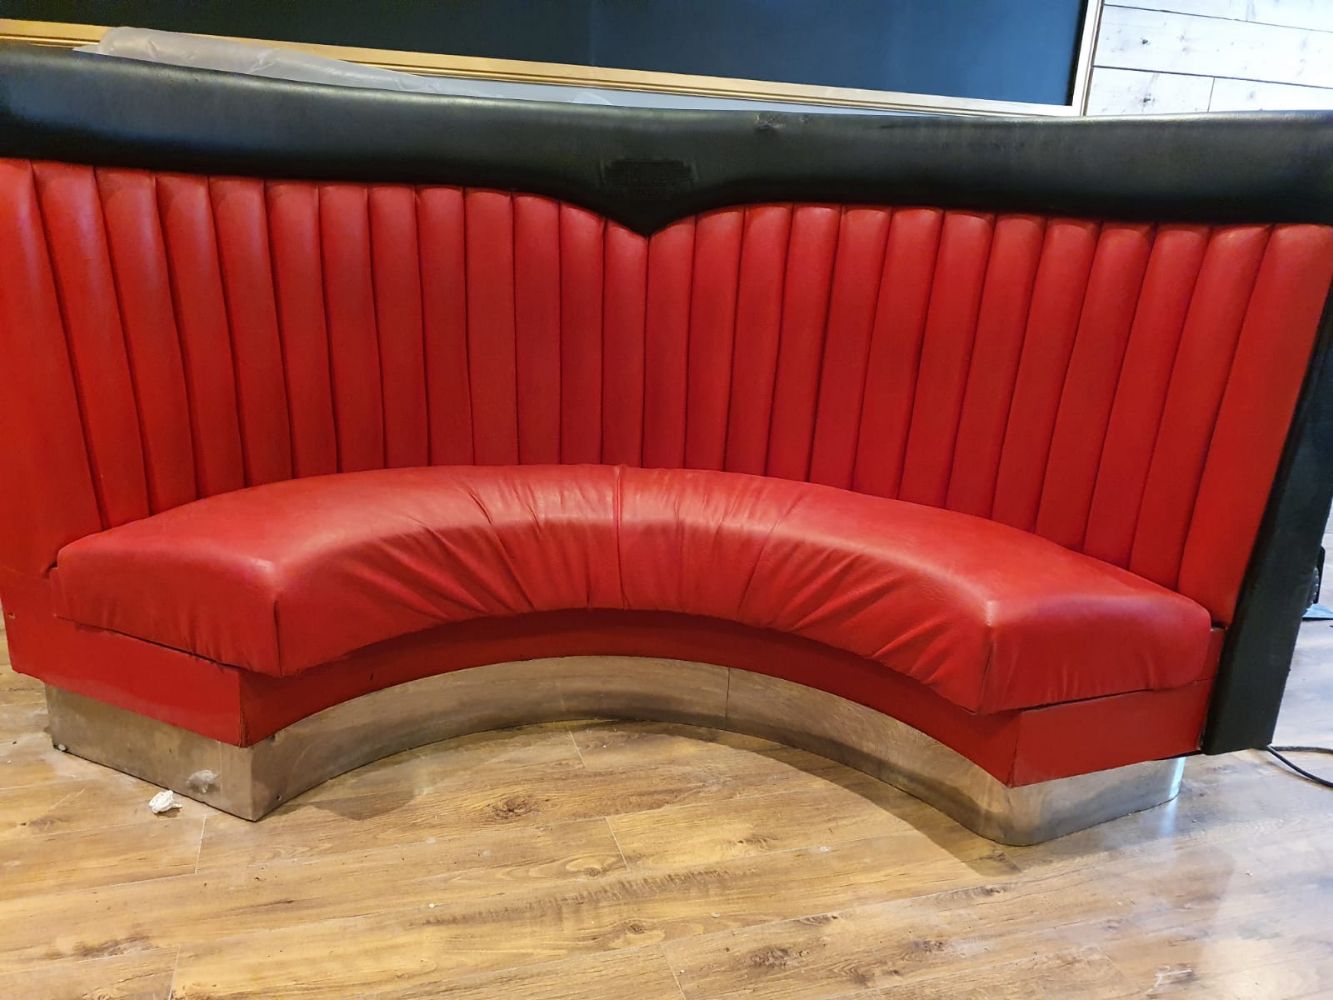 Top Quality American Diner Furniture, Including Original Big Moe's Diner Furniture and other quality kitchen equipment and a Fiat Ducato Van